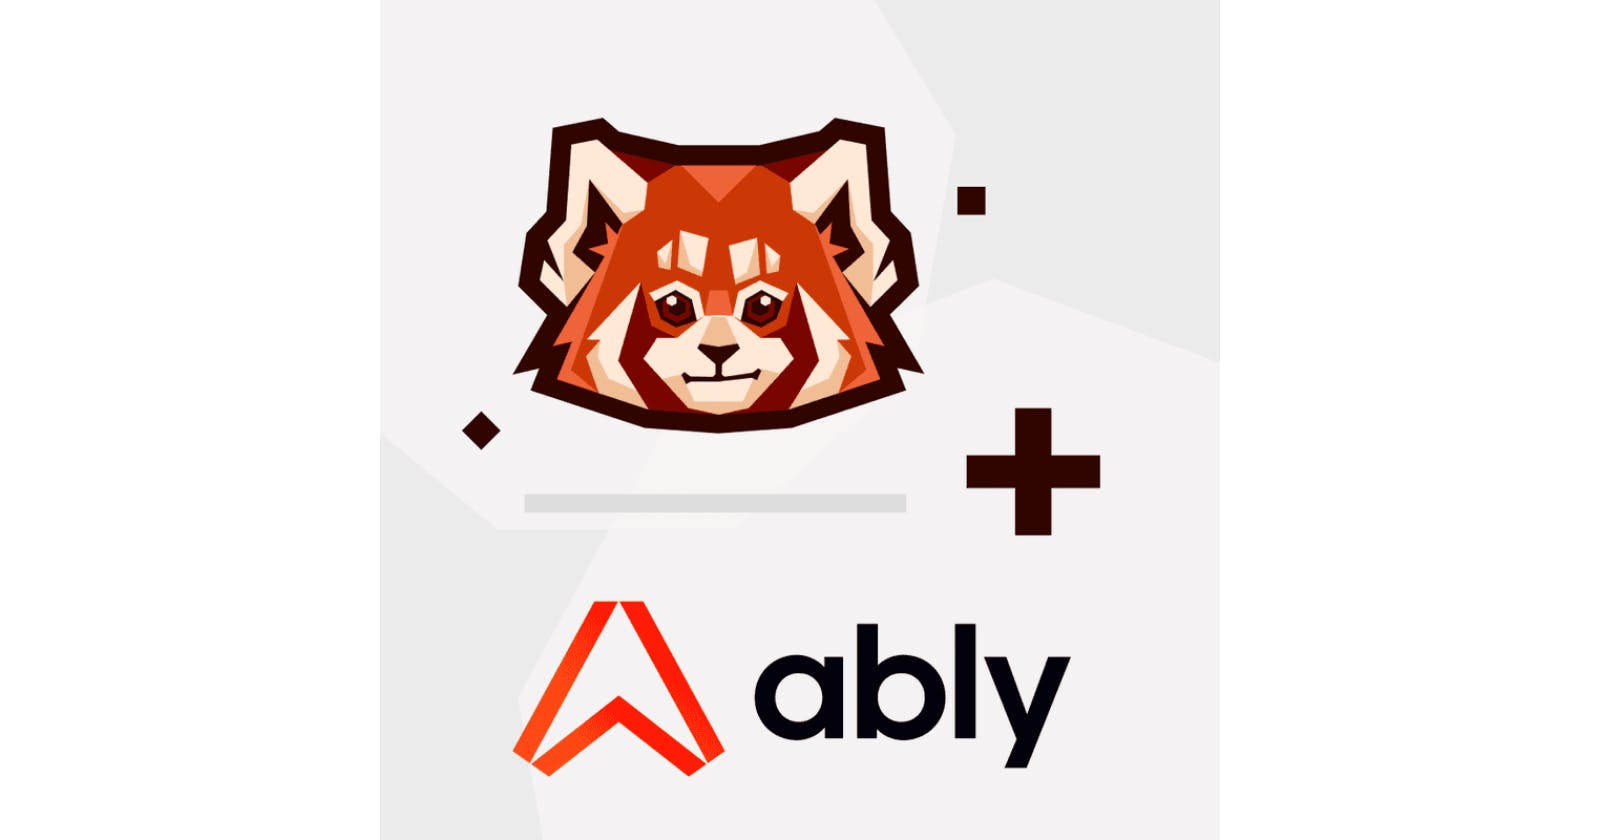 Ably + Redpanda for building a reliable and scalable real-time data pipeline